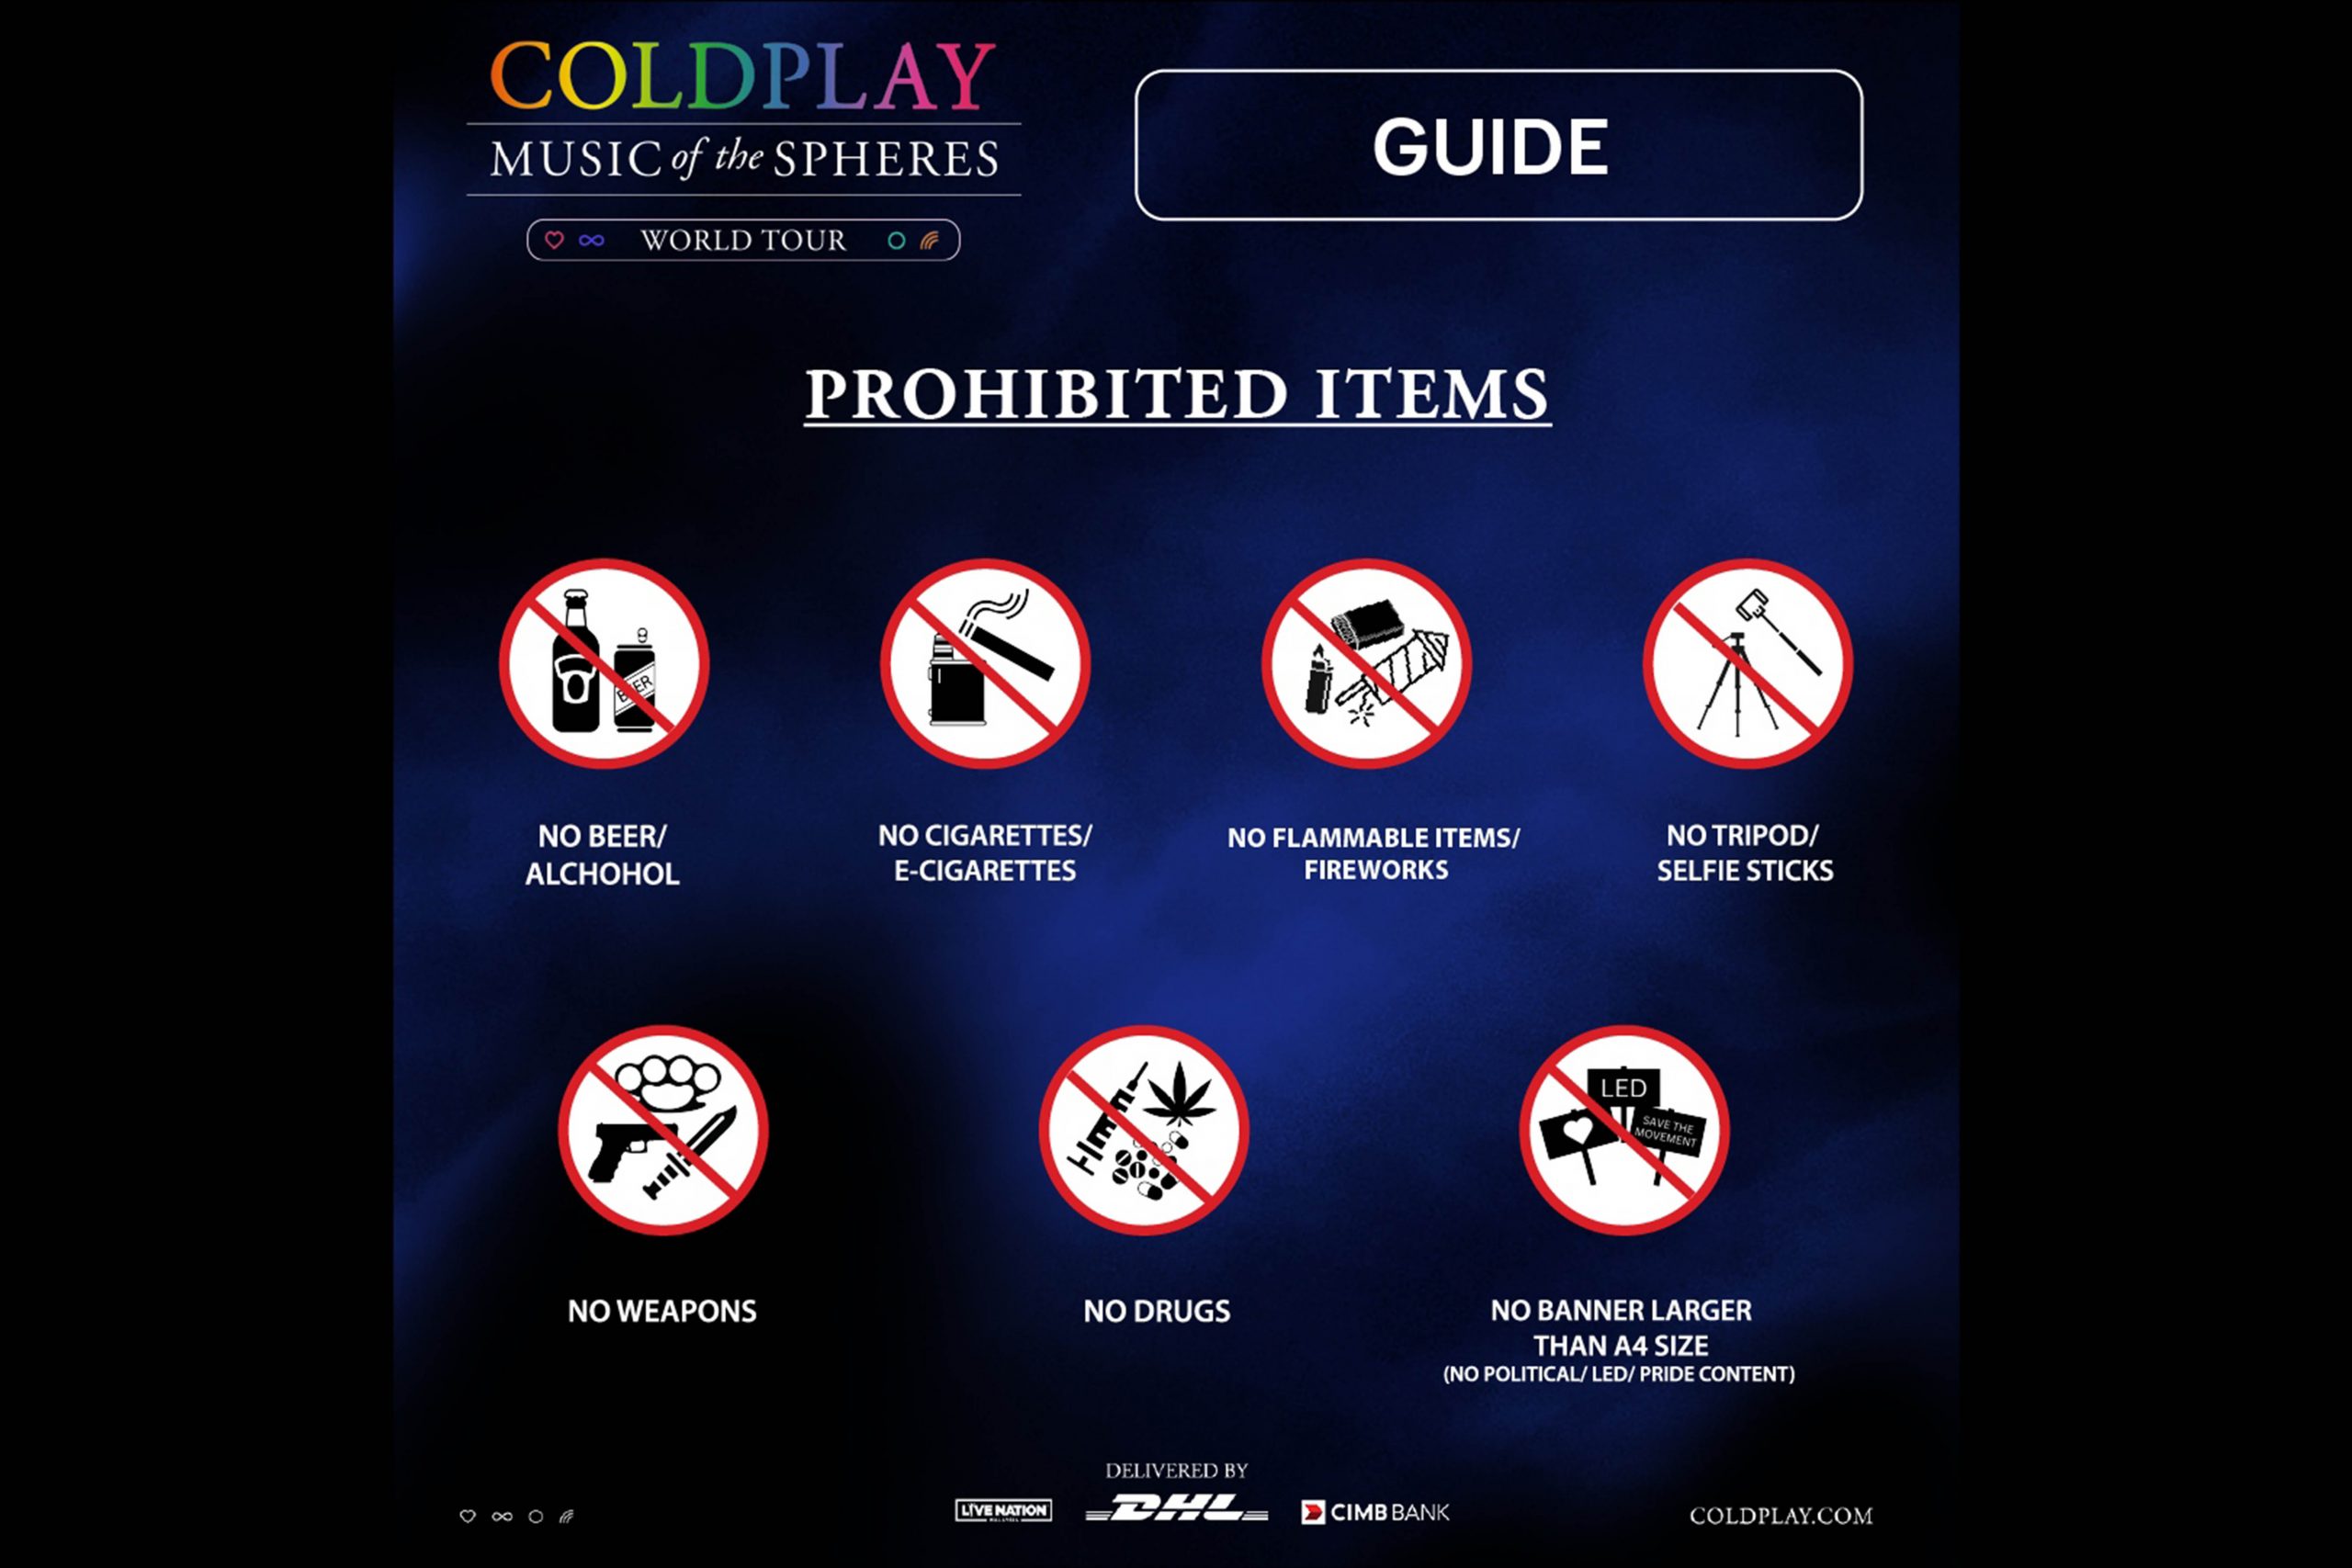 Political, LGBT banners banned from Coldplay’s coming KL concert